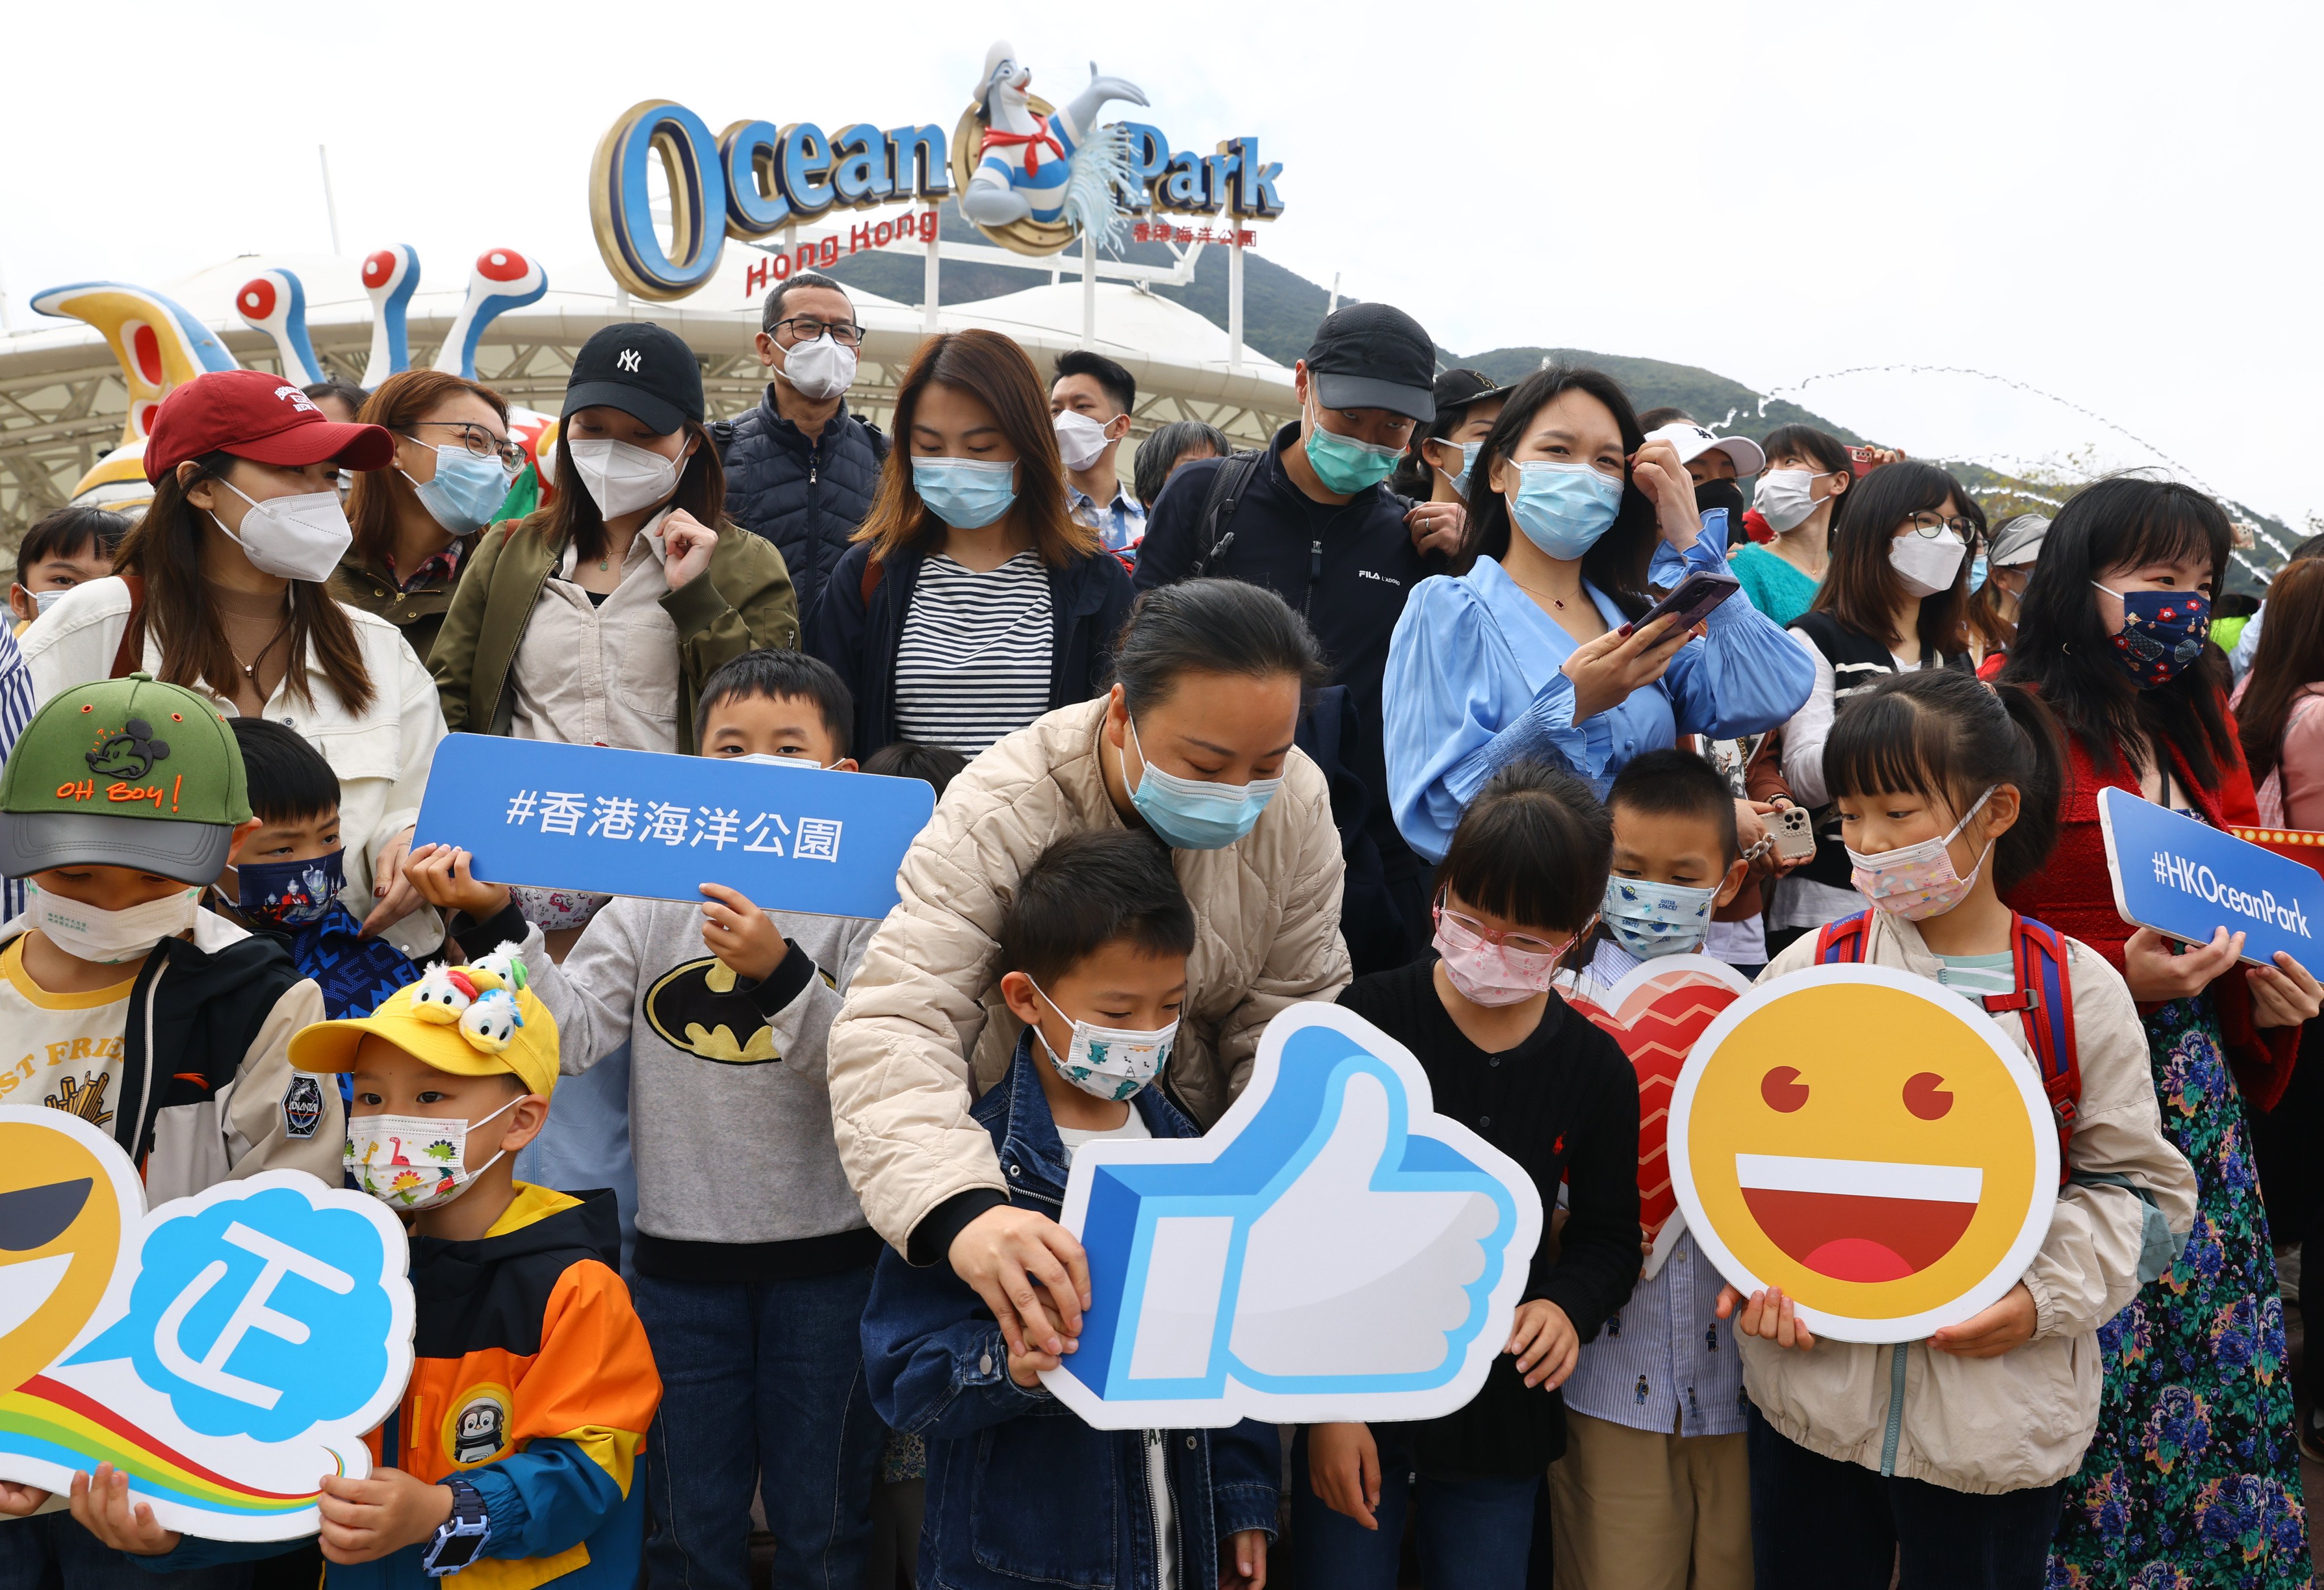 130 mainland travelers from First Single Destination Tour Group (from Shenzhen) arrive at Hong Kong’s Ocean Park on February 11, 2023. Photo: Dickson Lee